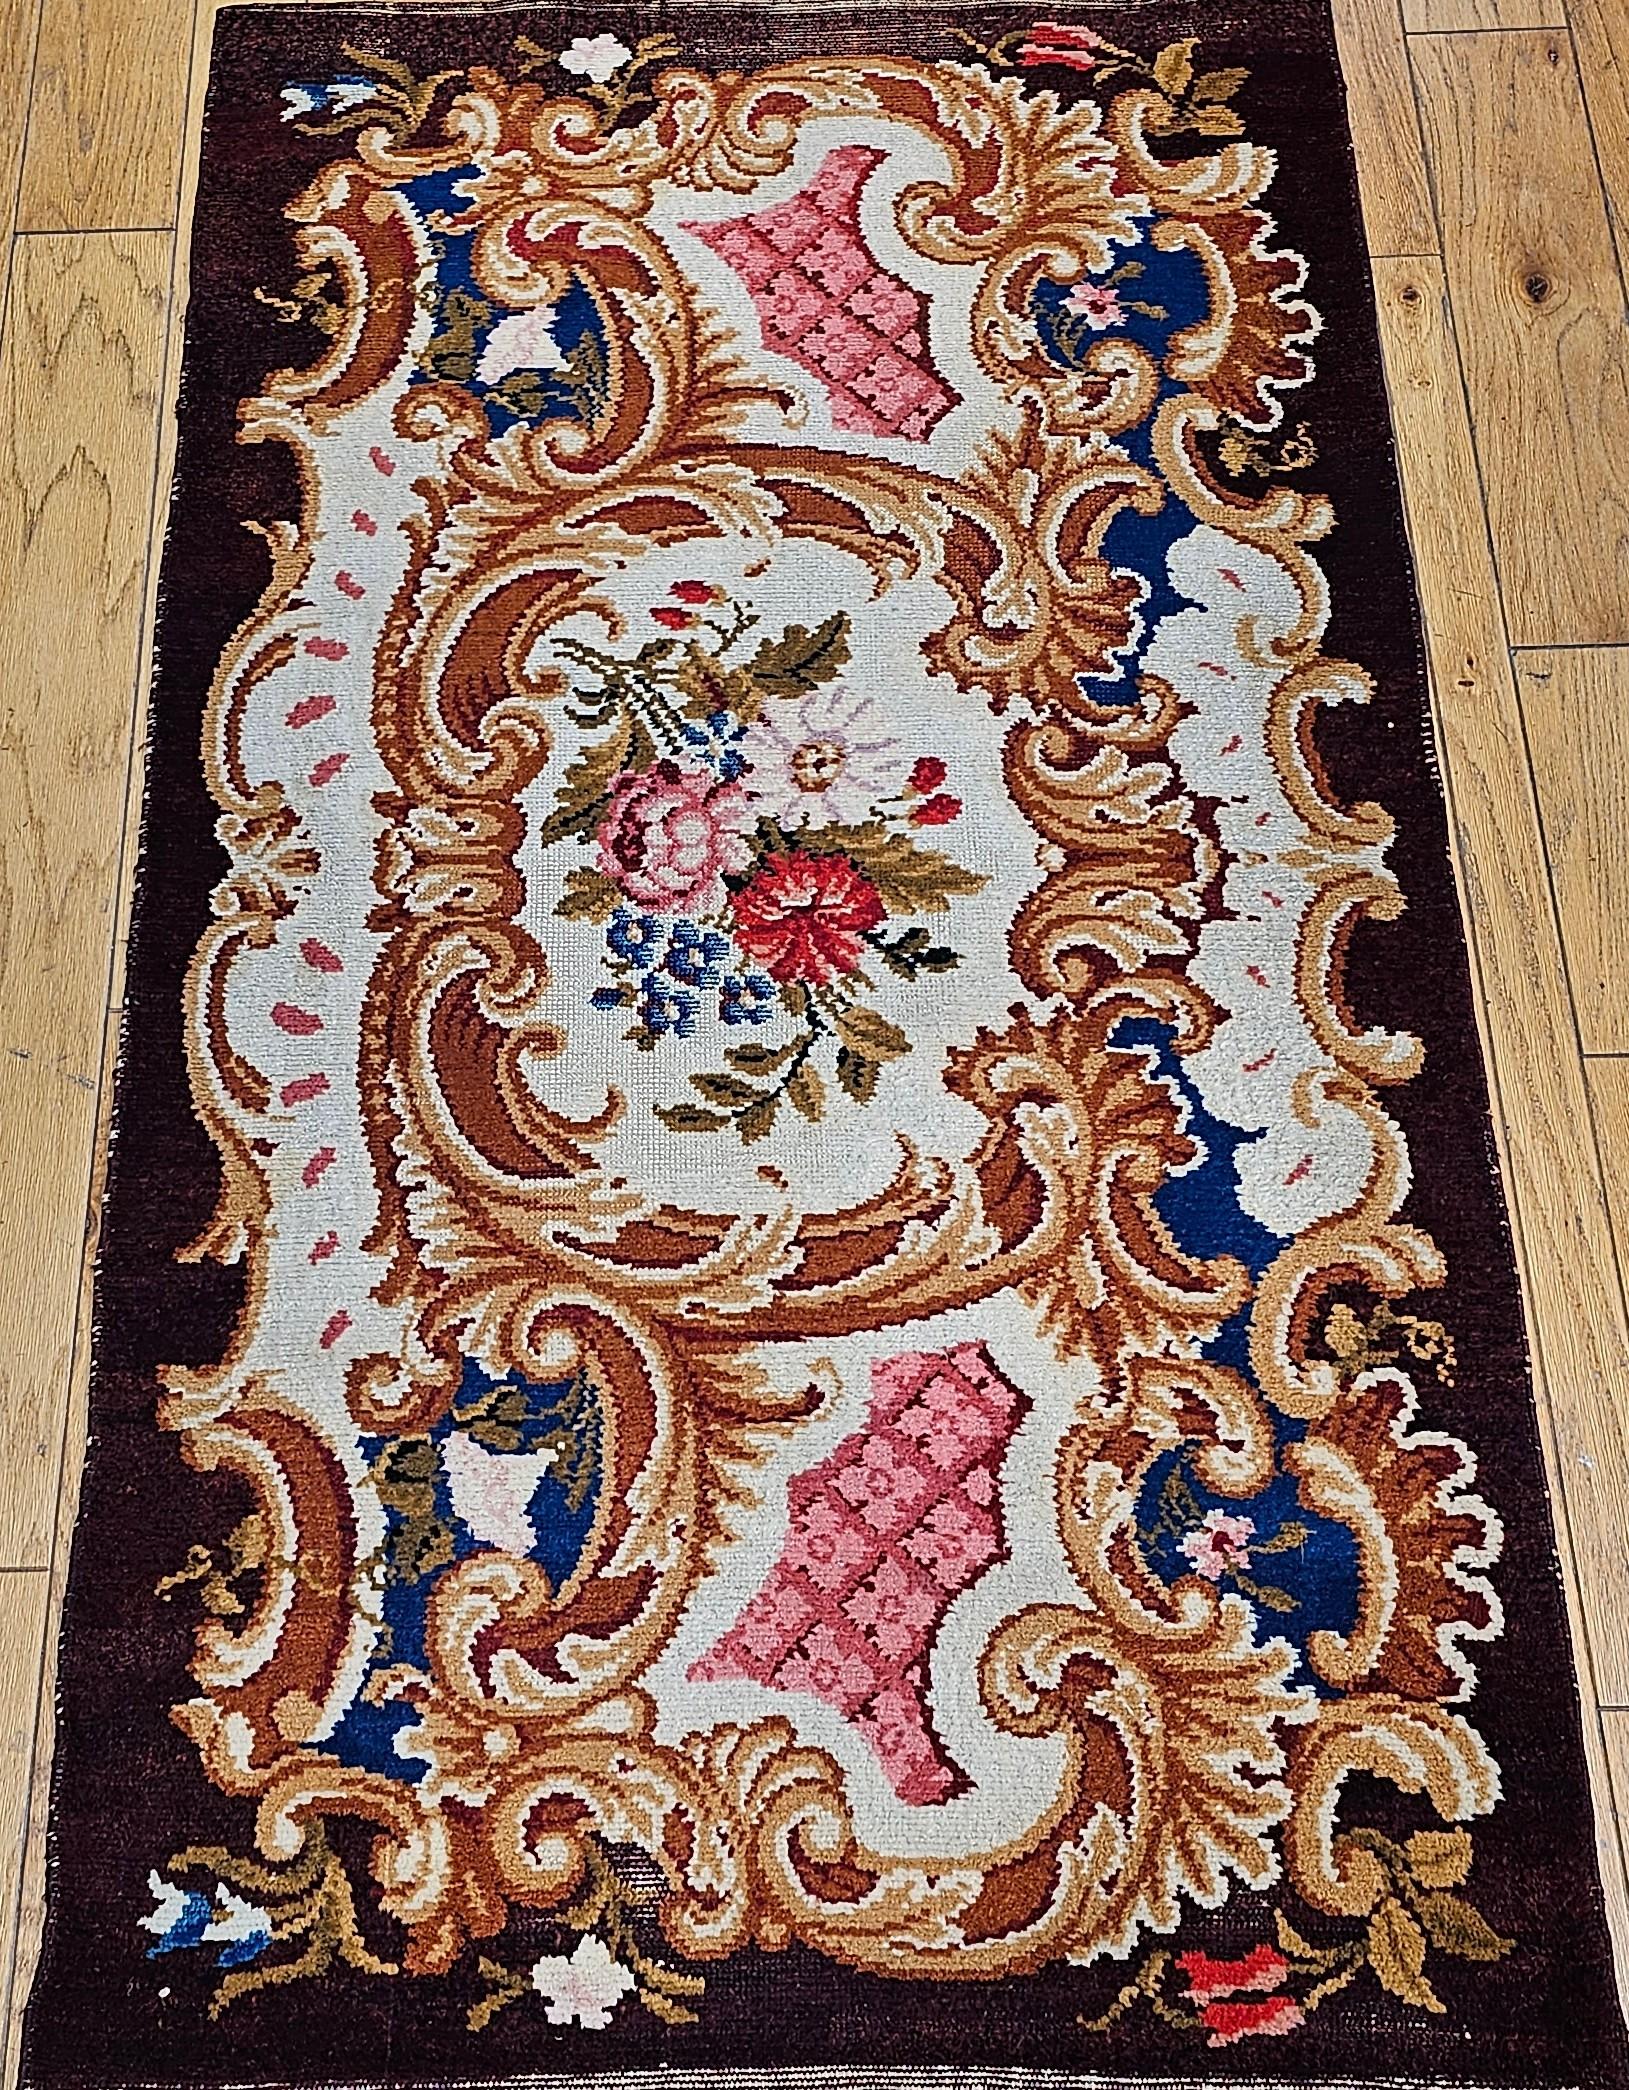 Vintage French Savonnerie hand-knotted area rug circa the early 1900s.  The Savonnerie rug has a classic floral pattern set on a rich chocolate brown background with wonderful design colors in red, pink, blue, and ivory.  This rug (SKU 1736) and the